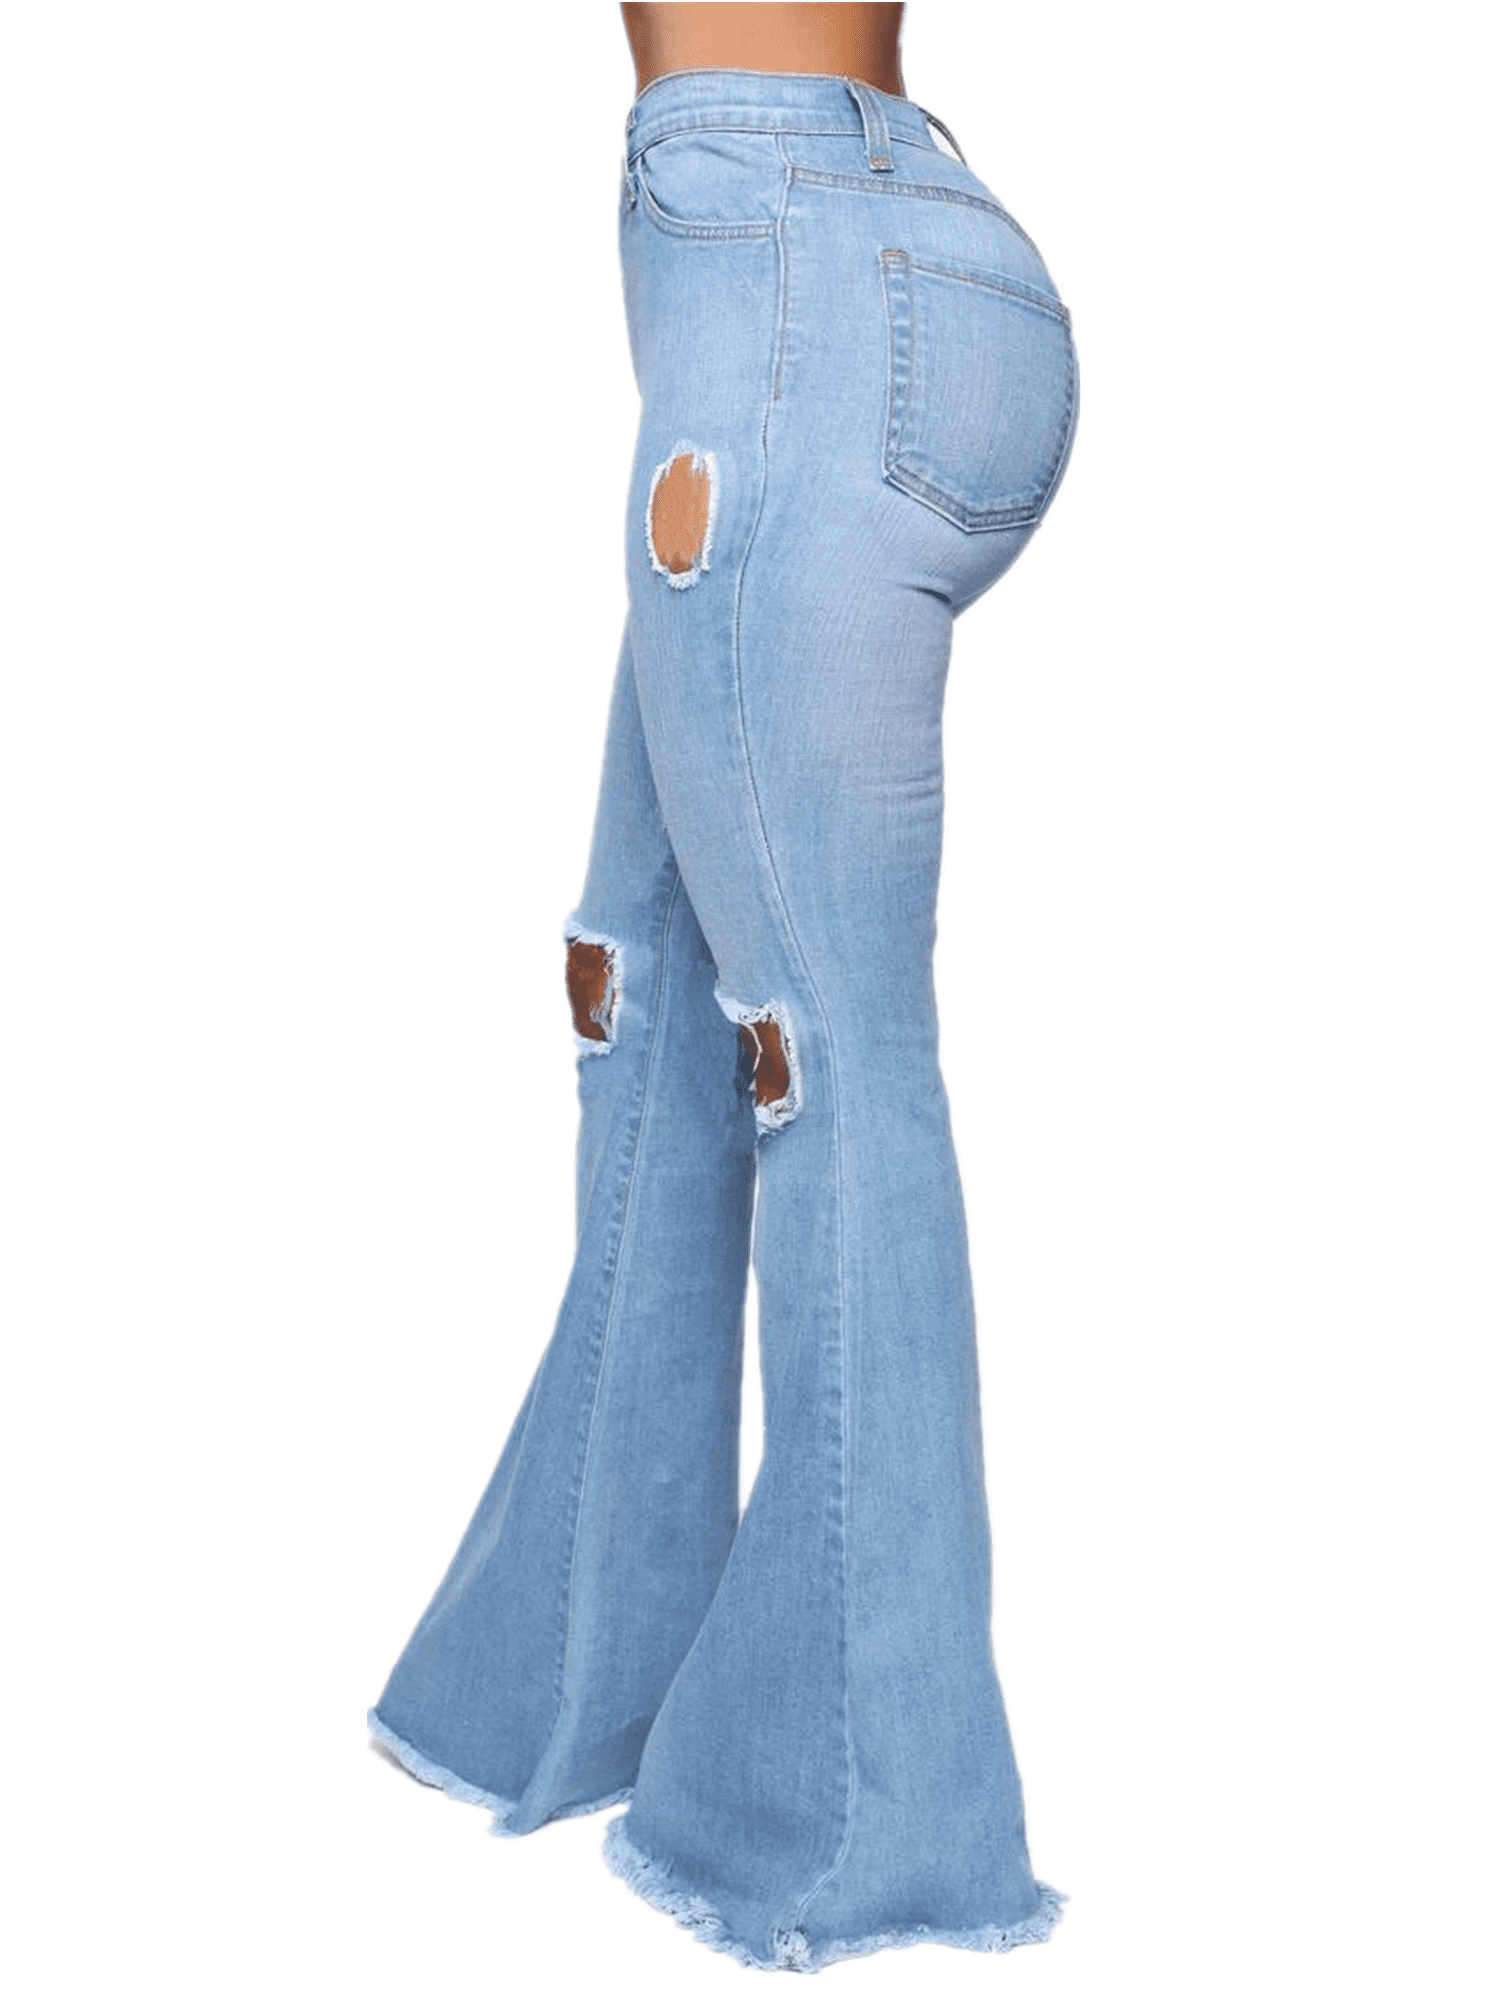 Details about  / American Girl Place Store Exclusive Cuffed Denim Pants for Dolls with Star Logo